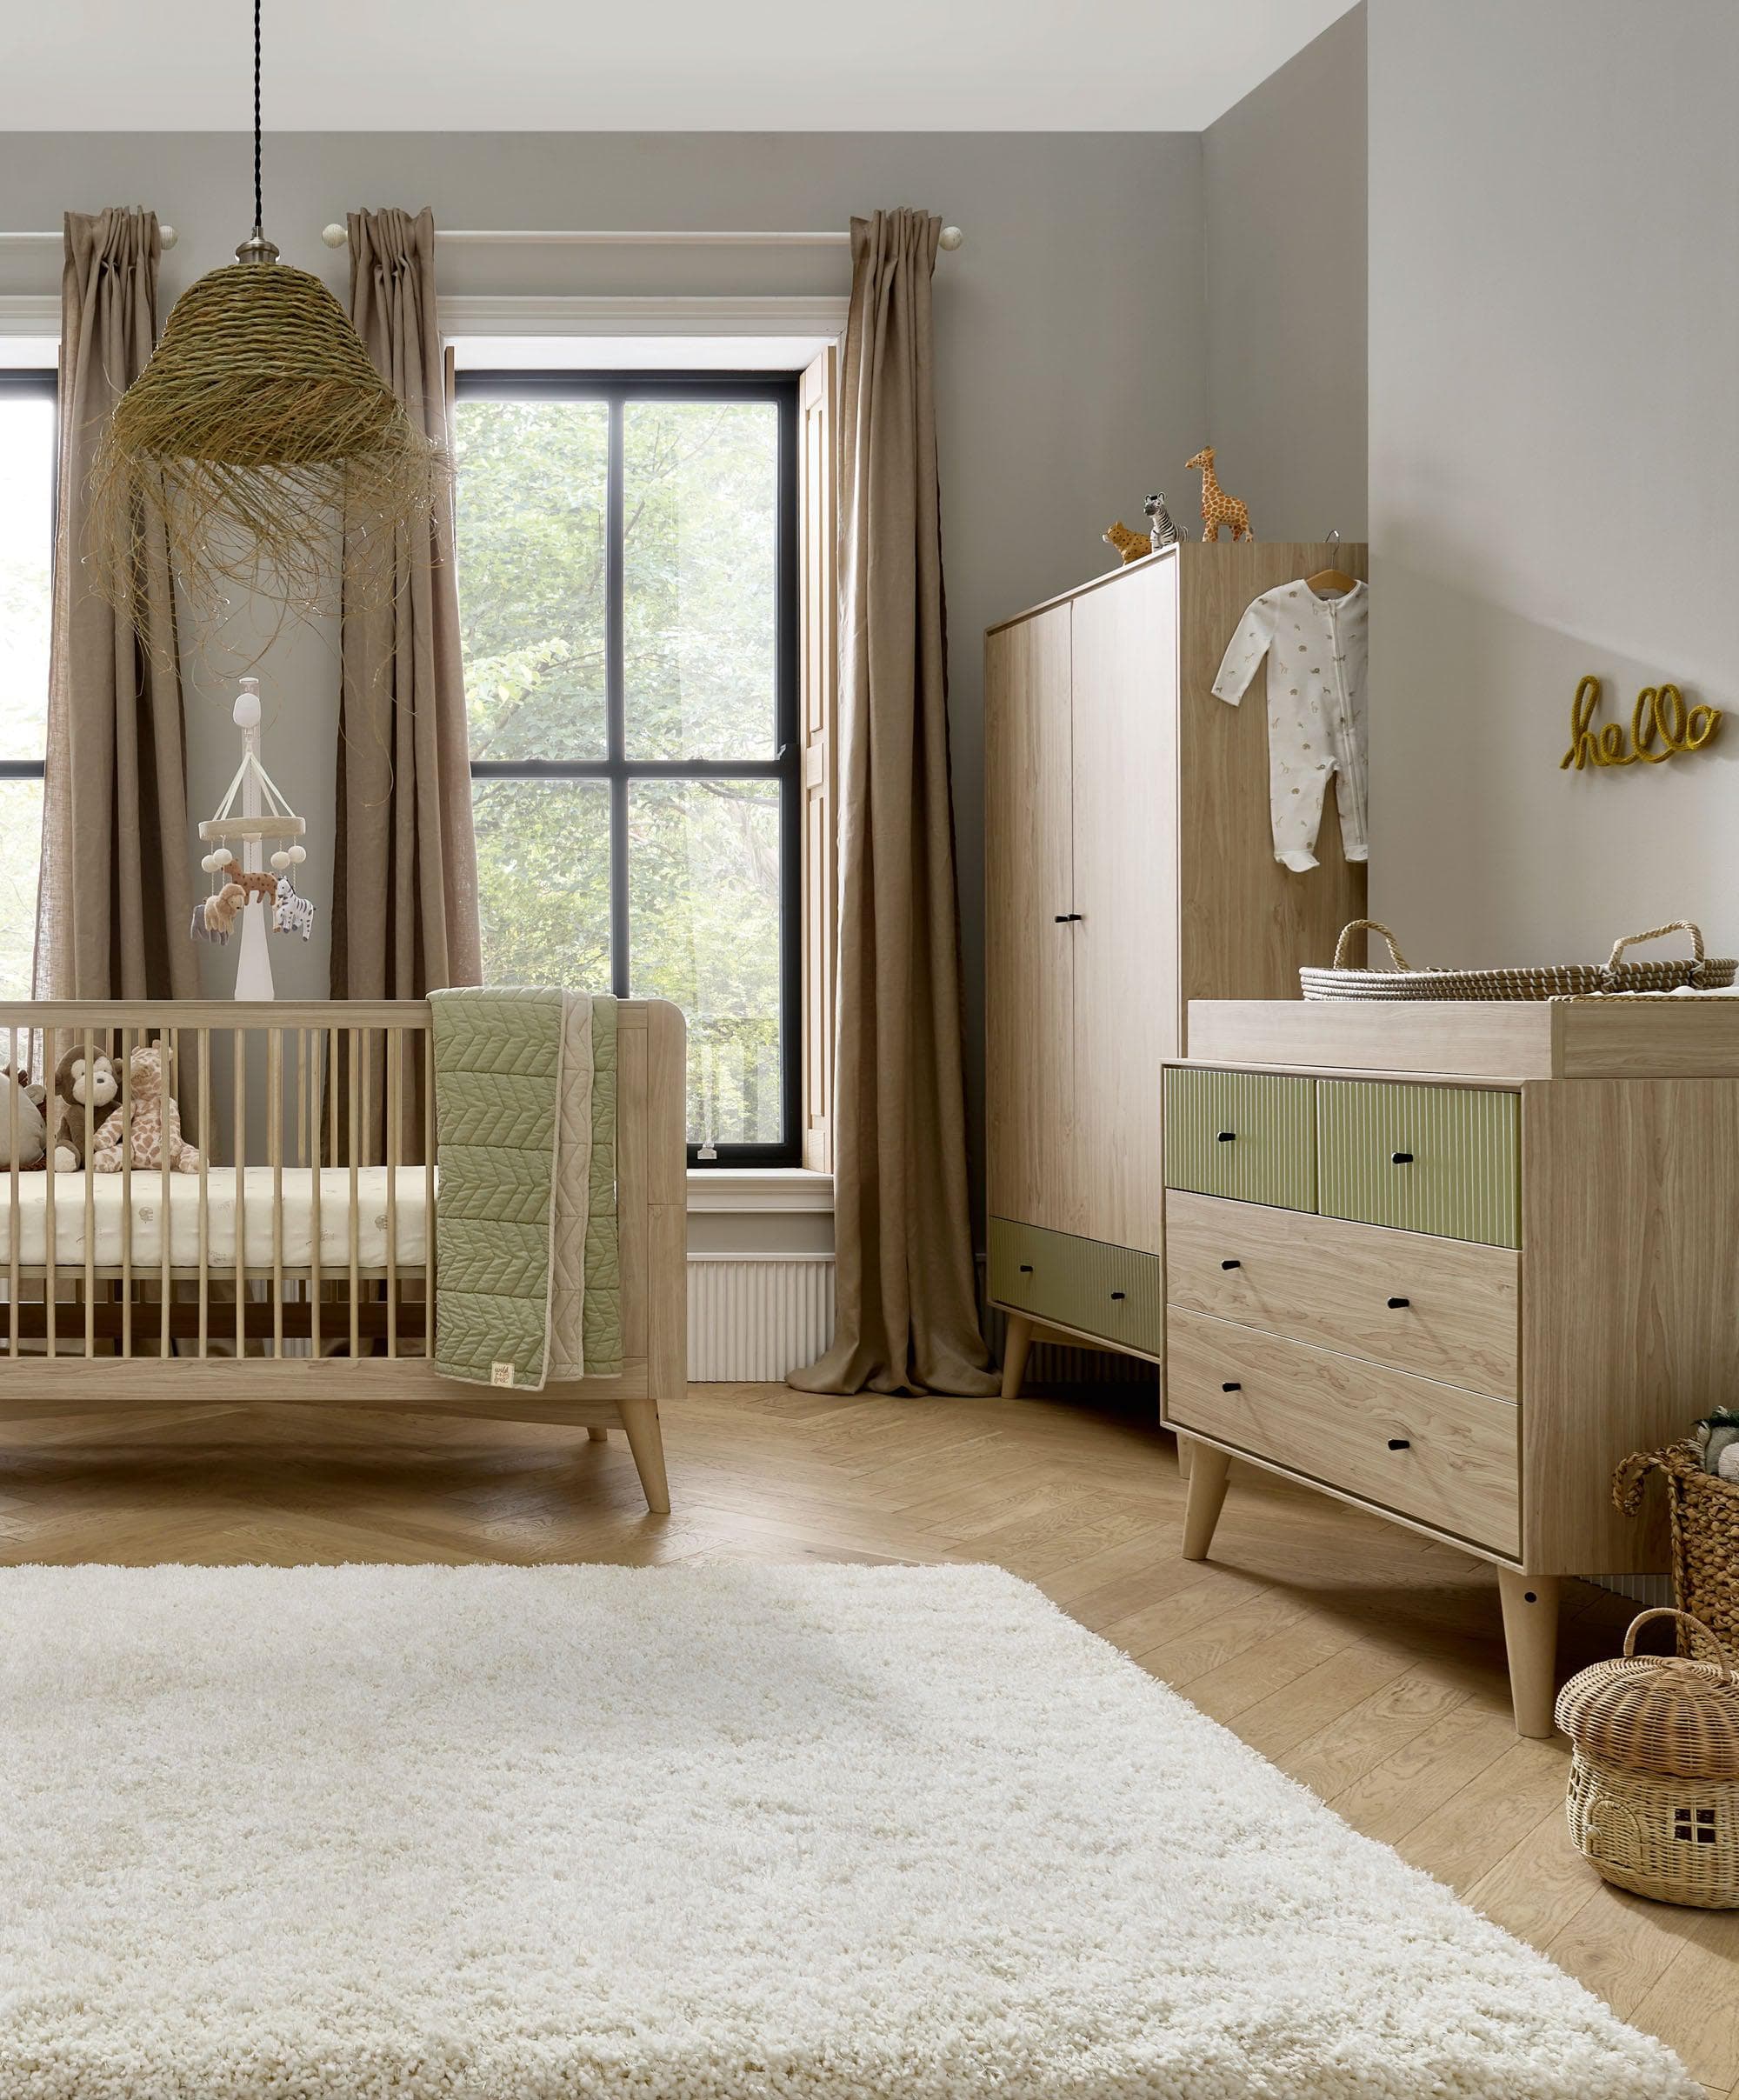 Coxley 3 Piece Cotbed Range with Dresser Changer & Wardrobe - Natural/Olive Green